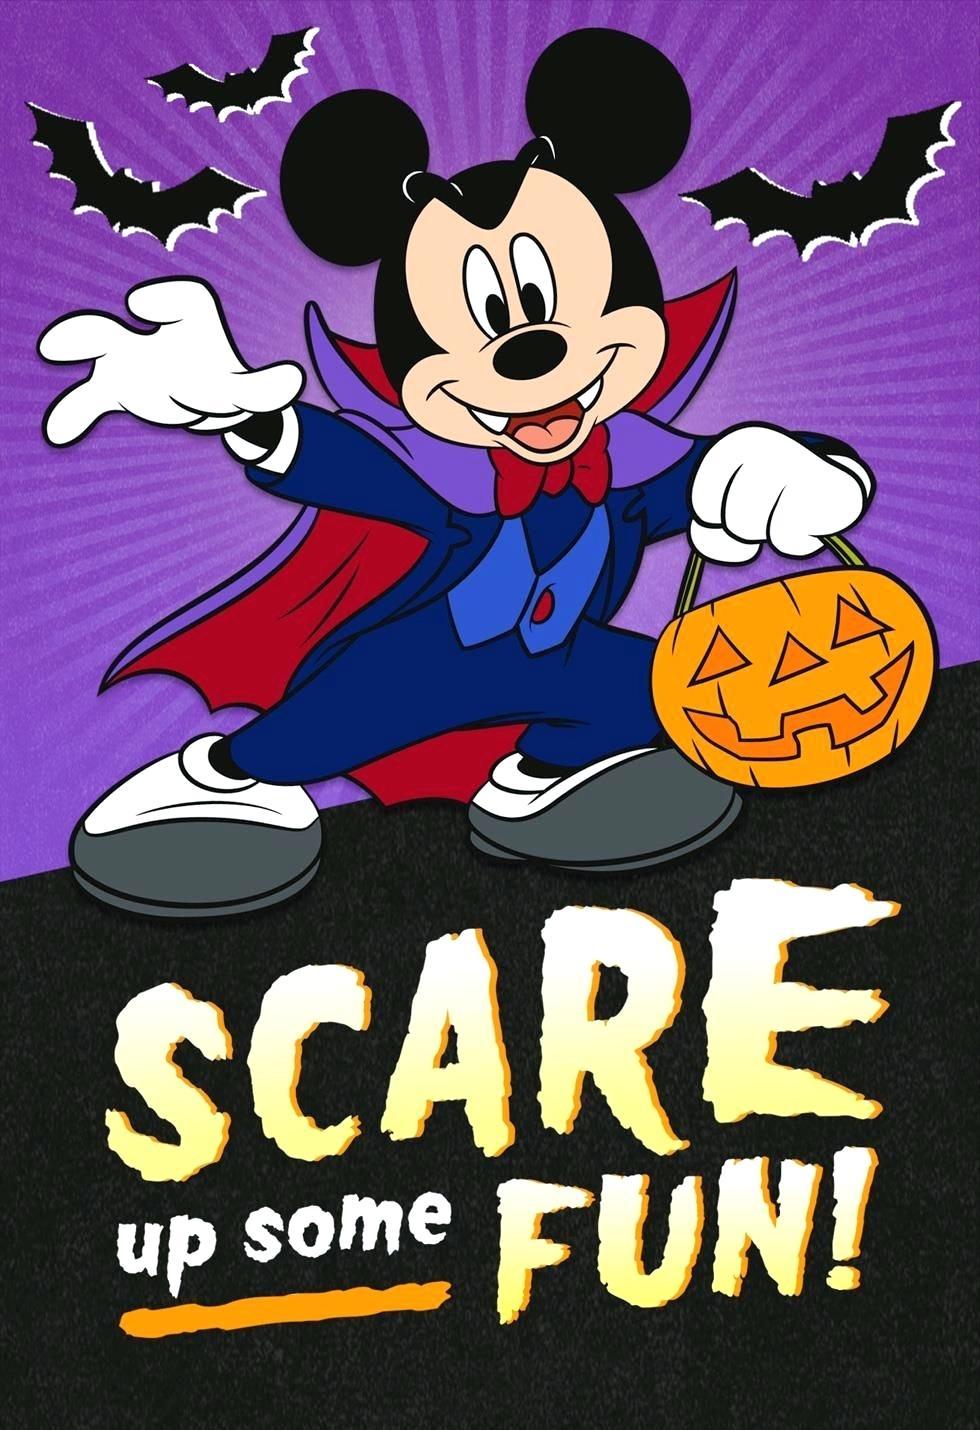 mickey mouse halloween image